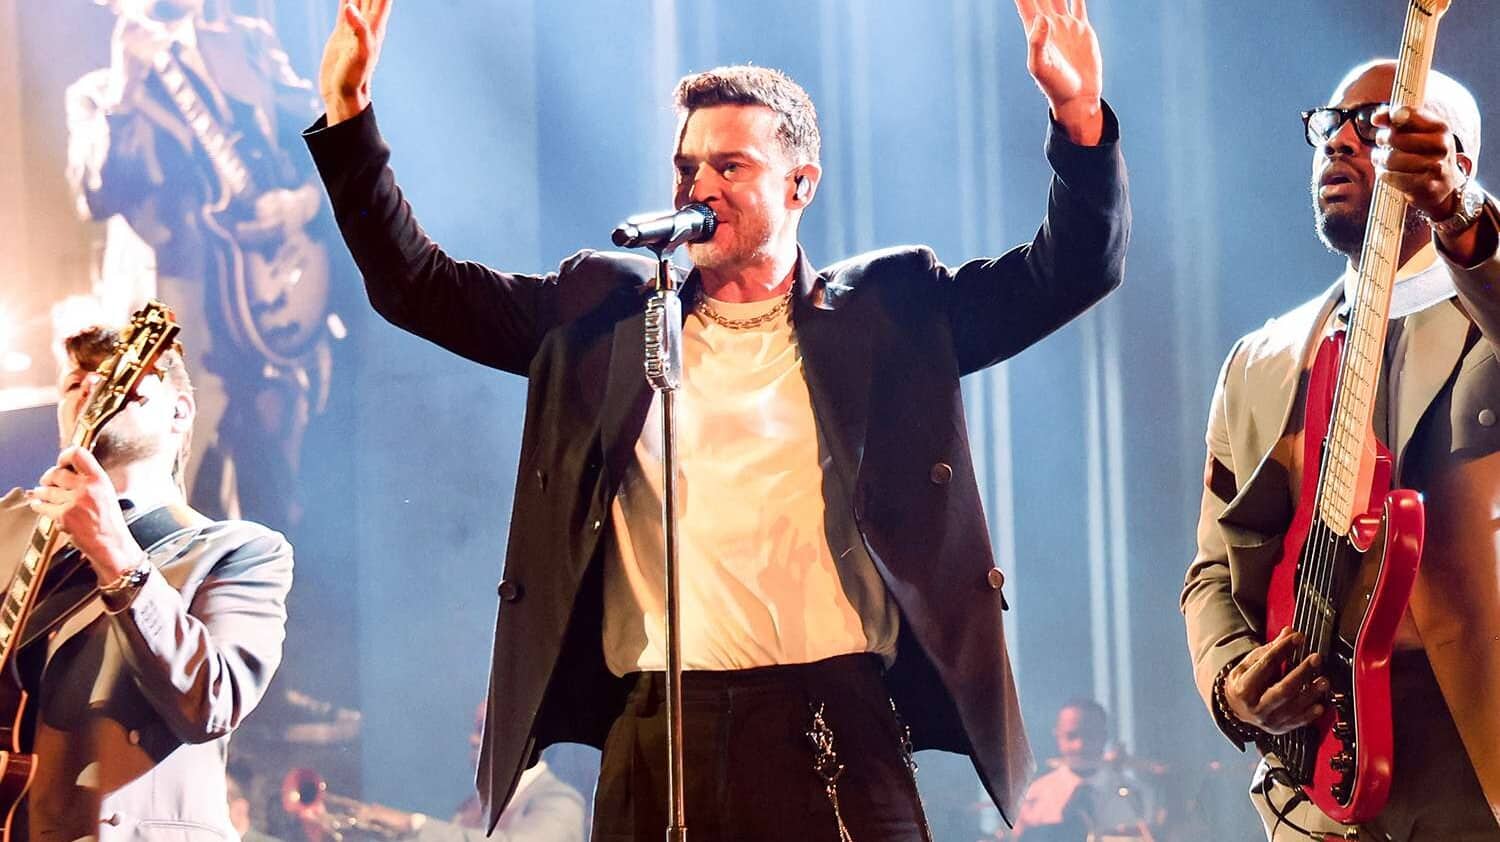 'Been a tough week': Justin Timberlake on first performance post-arrest